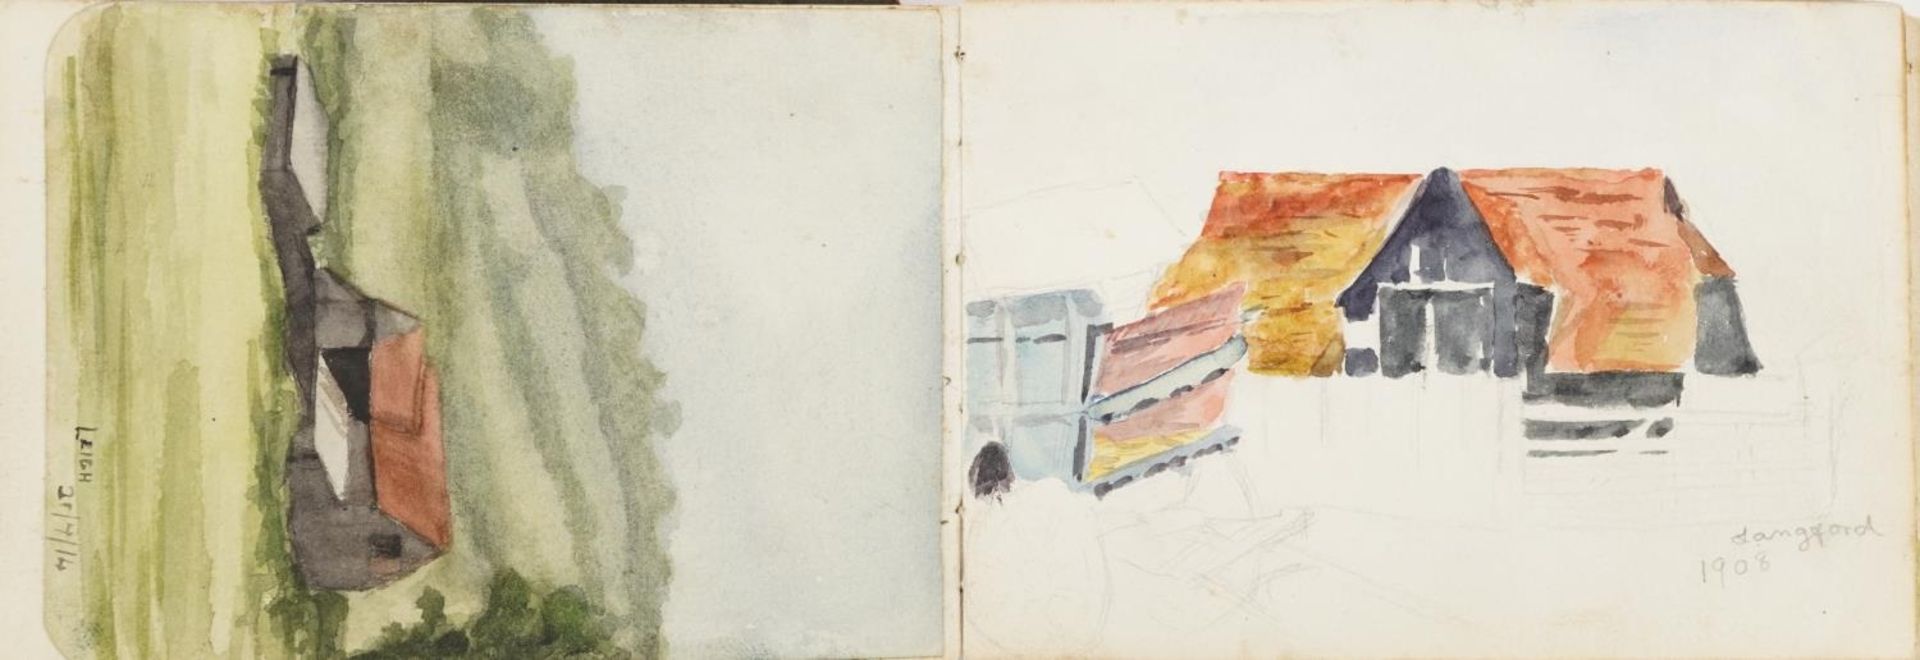 Early 20th century artist's travel sketchbook housing various watercolours and pencil sketches - Image 4 of 15